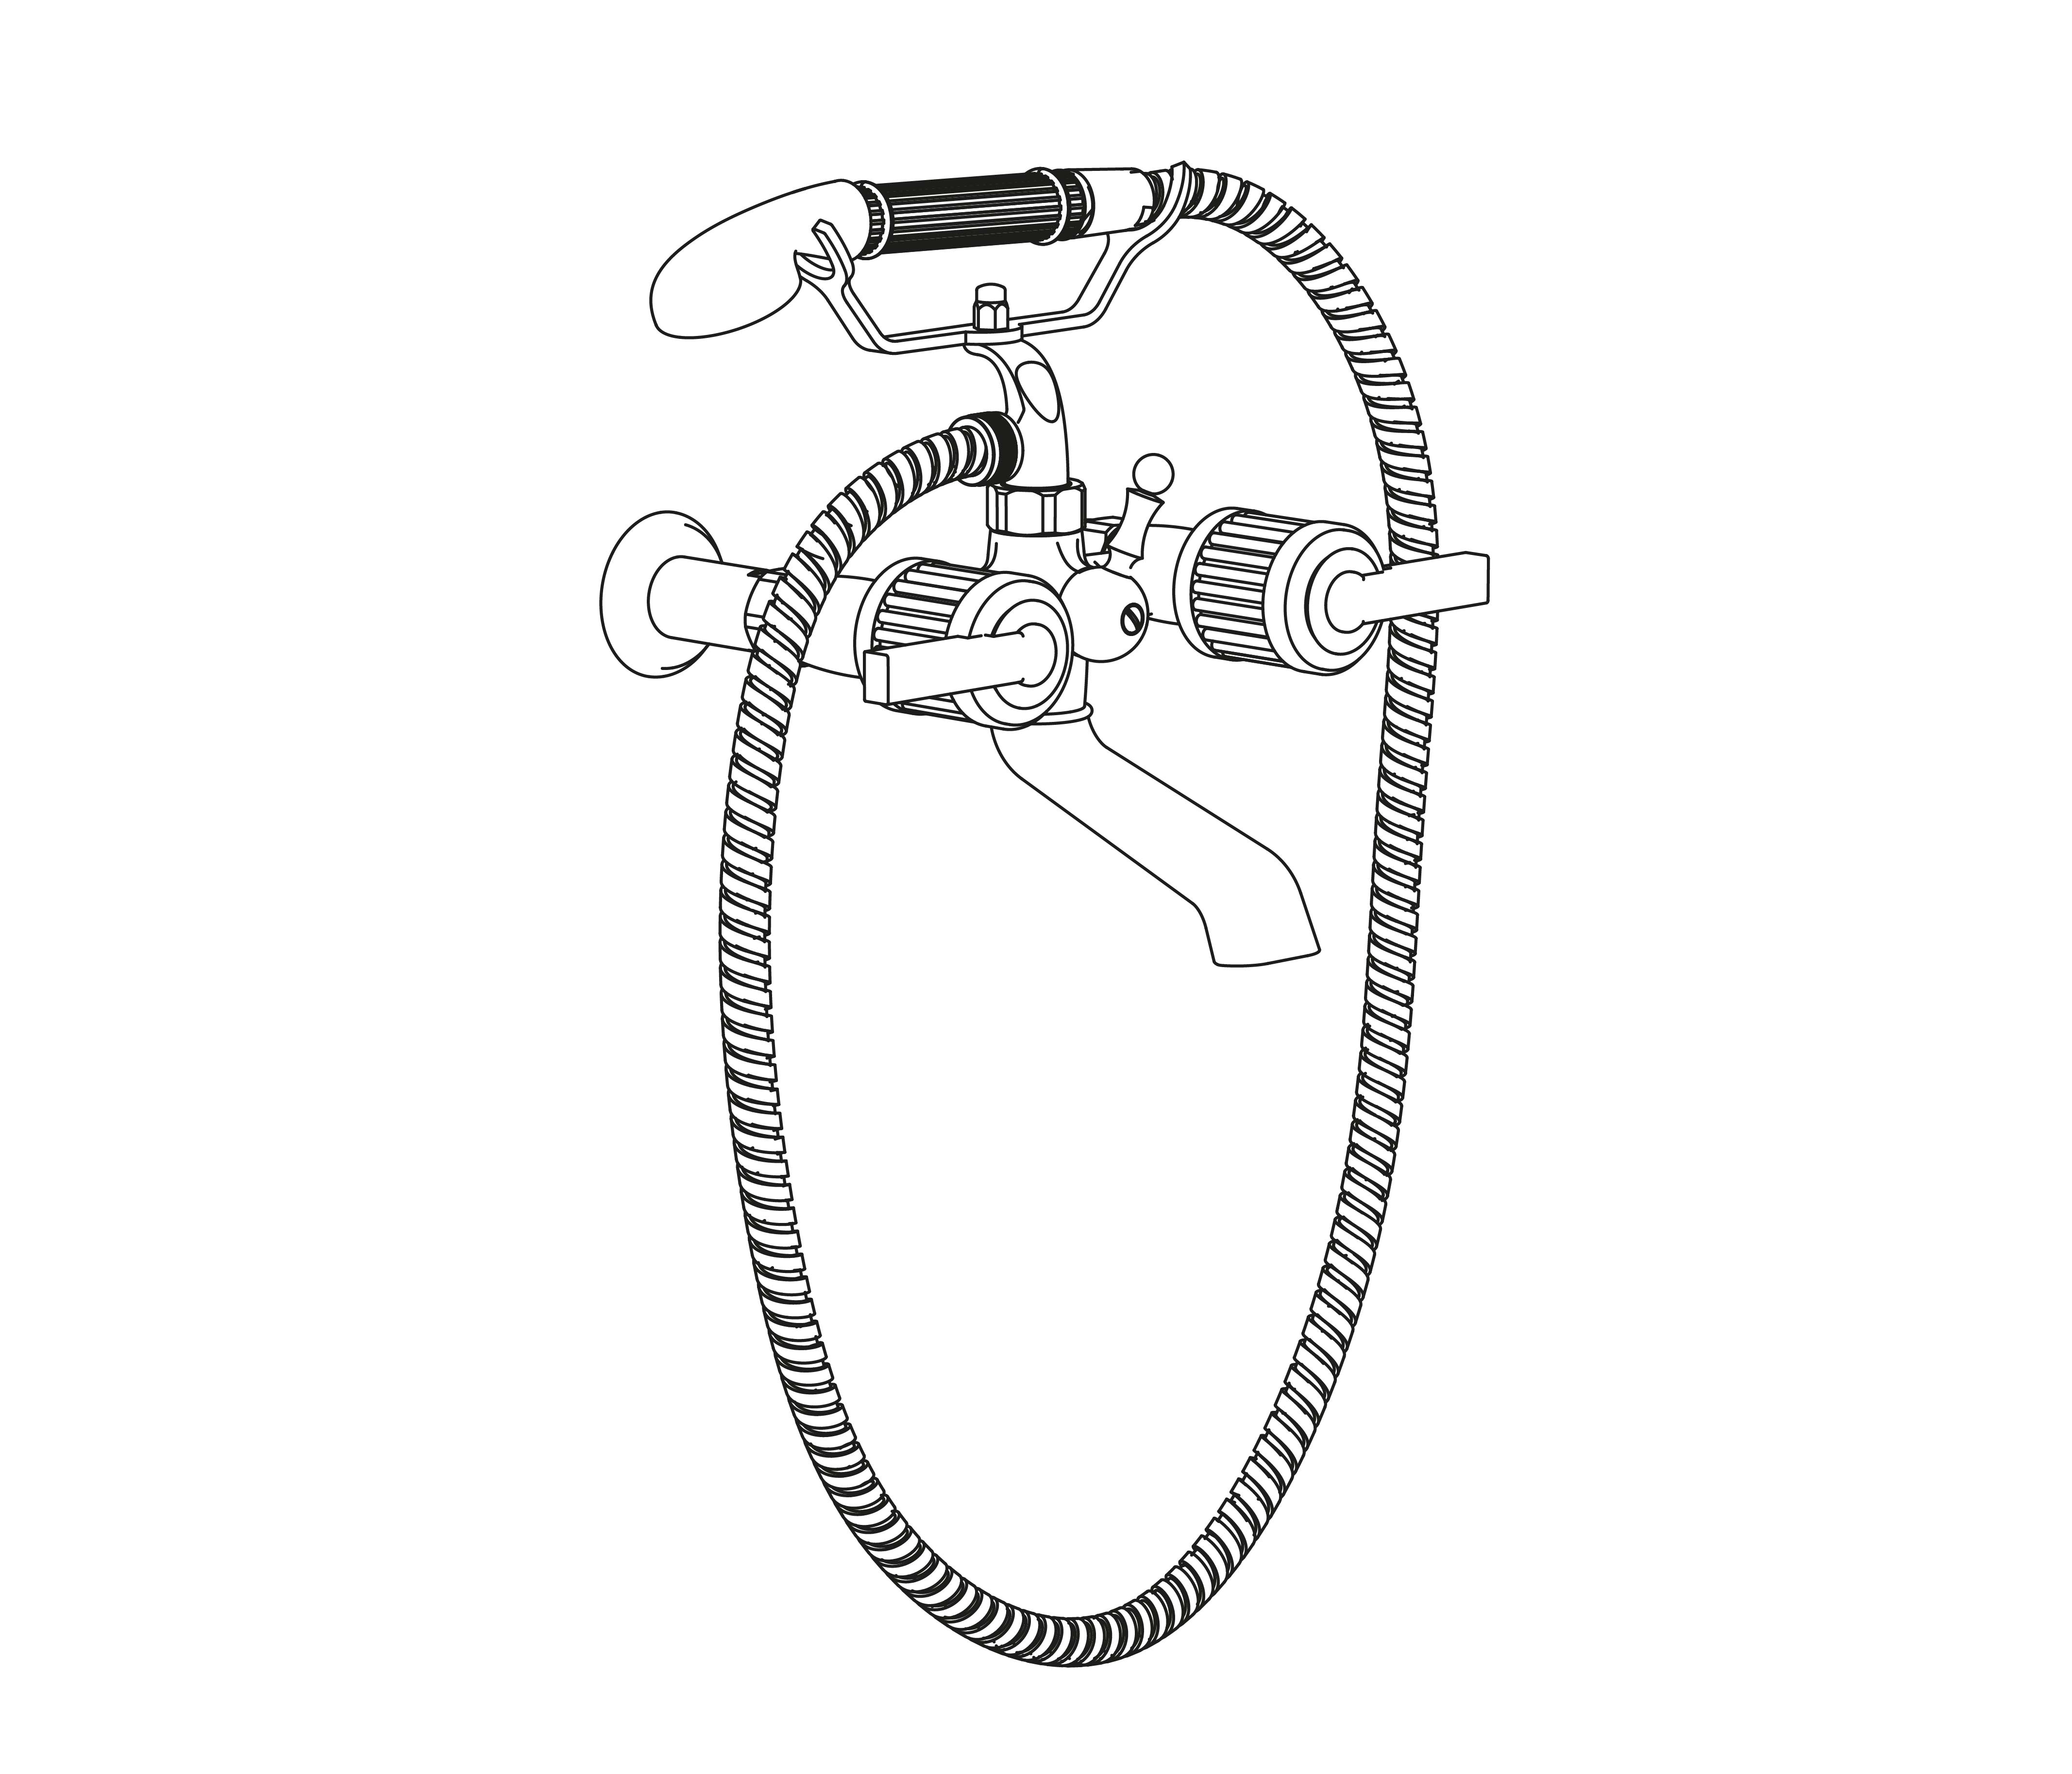 S108-3201 Wall mounted bath and shower mixer